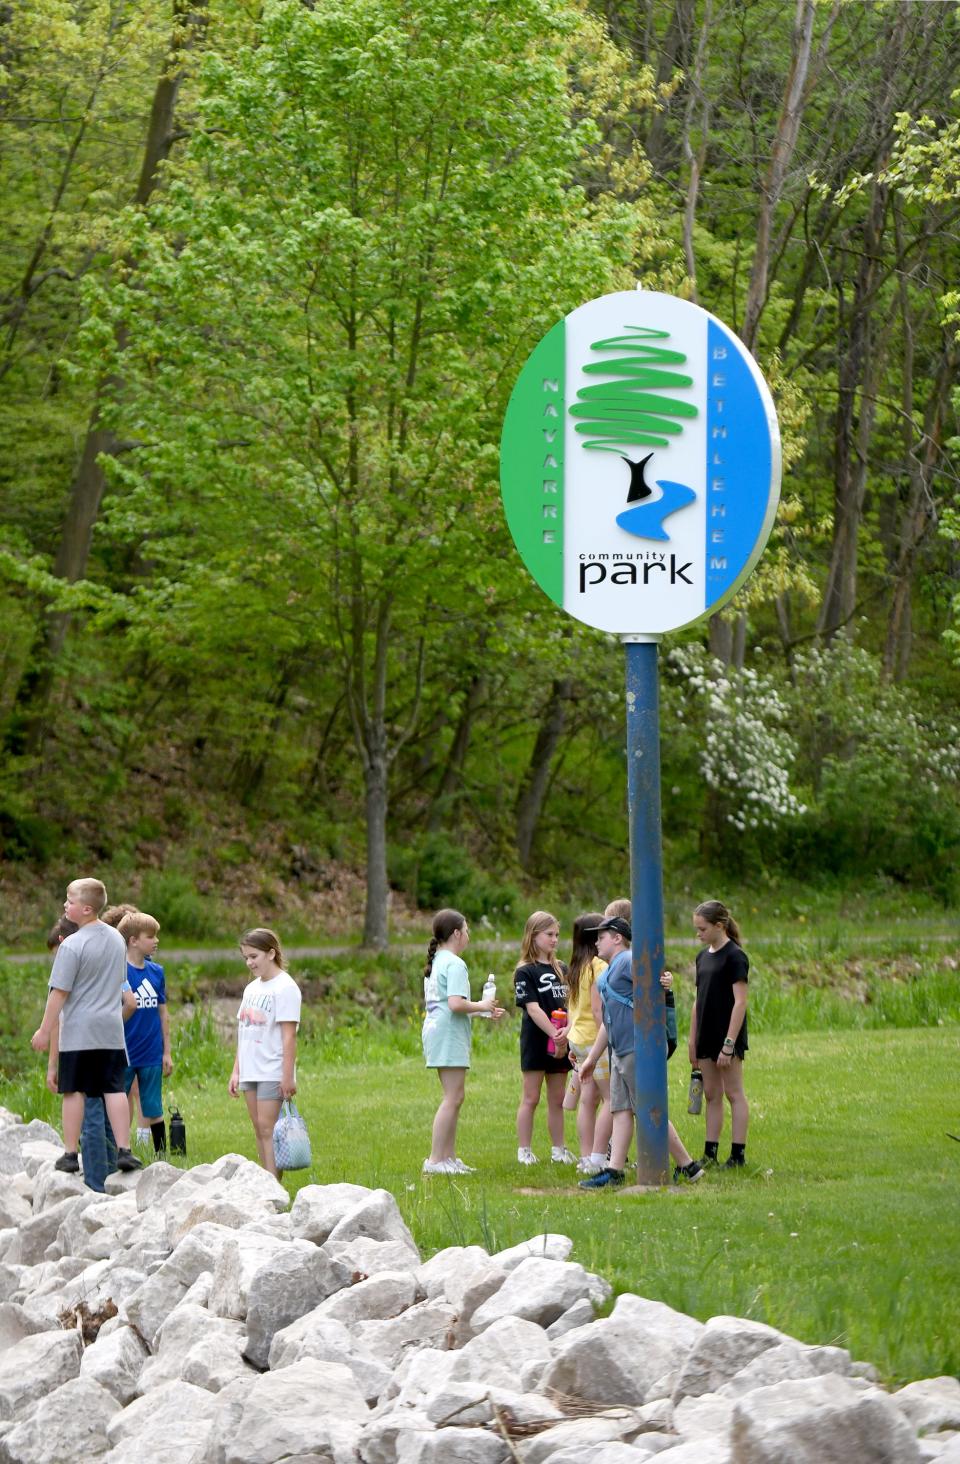 Fifth graders from Fairless Elementary School created art representing the history of Navarre as part of an installation at Navarre-Bethlehem Township Park.